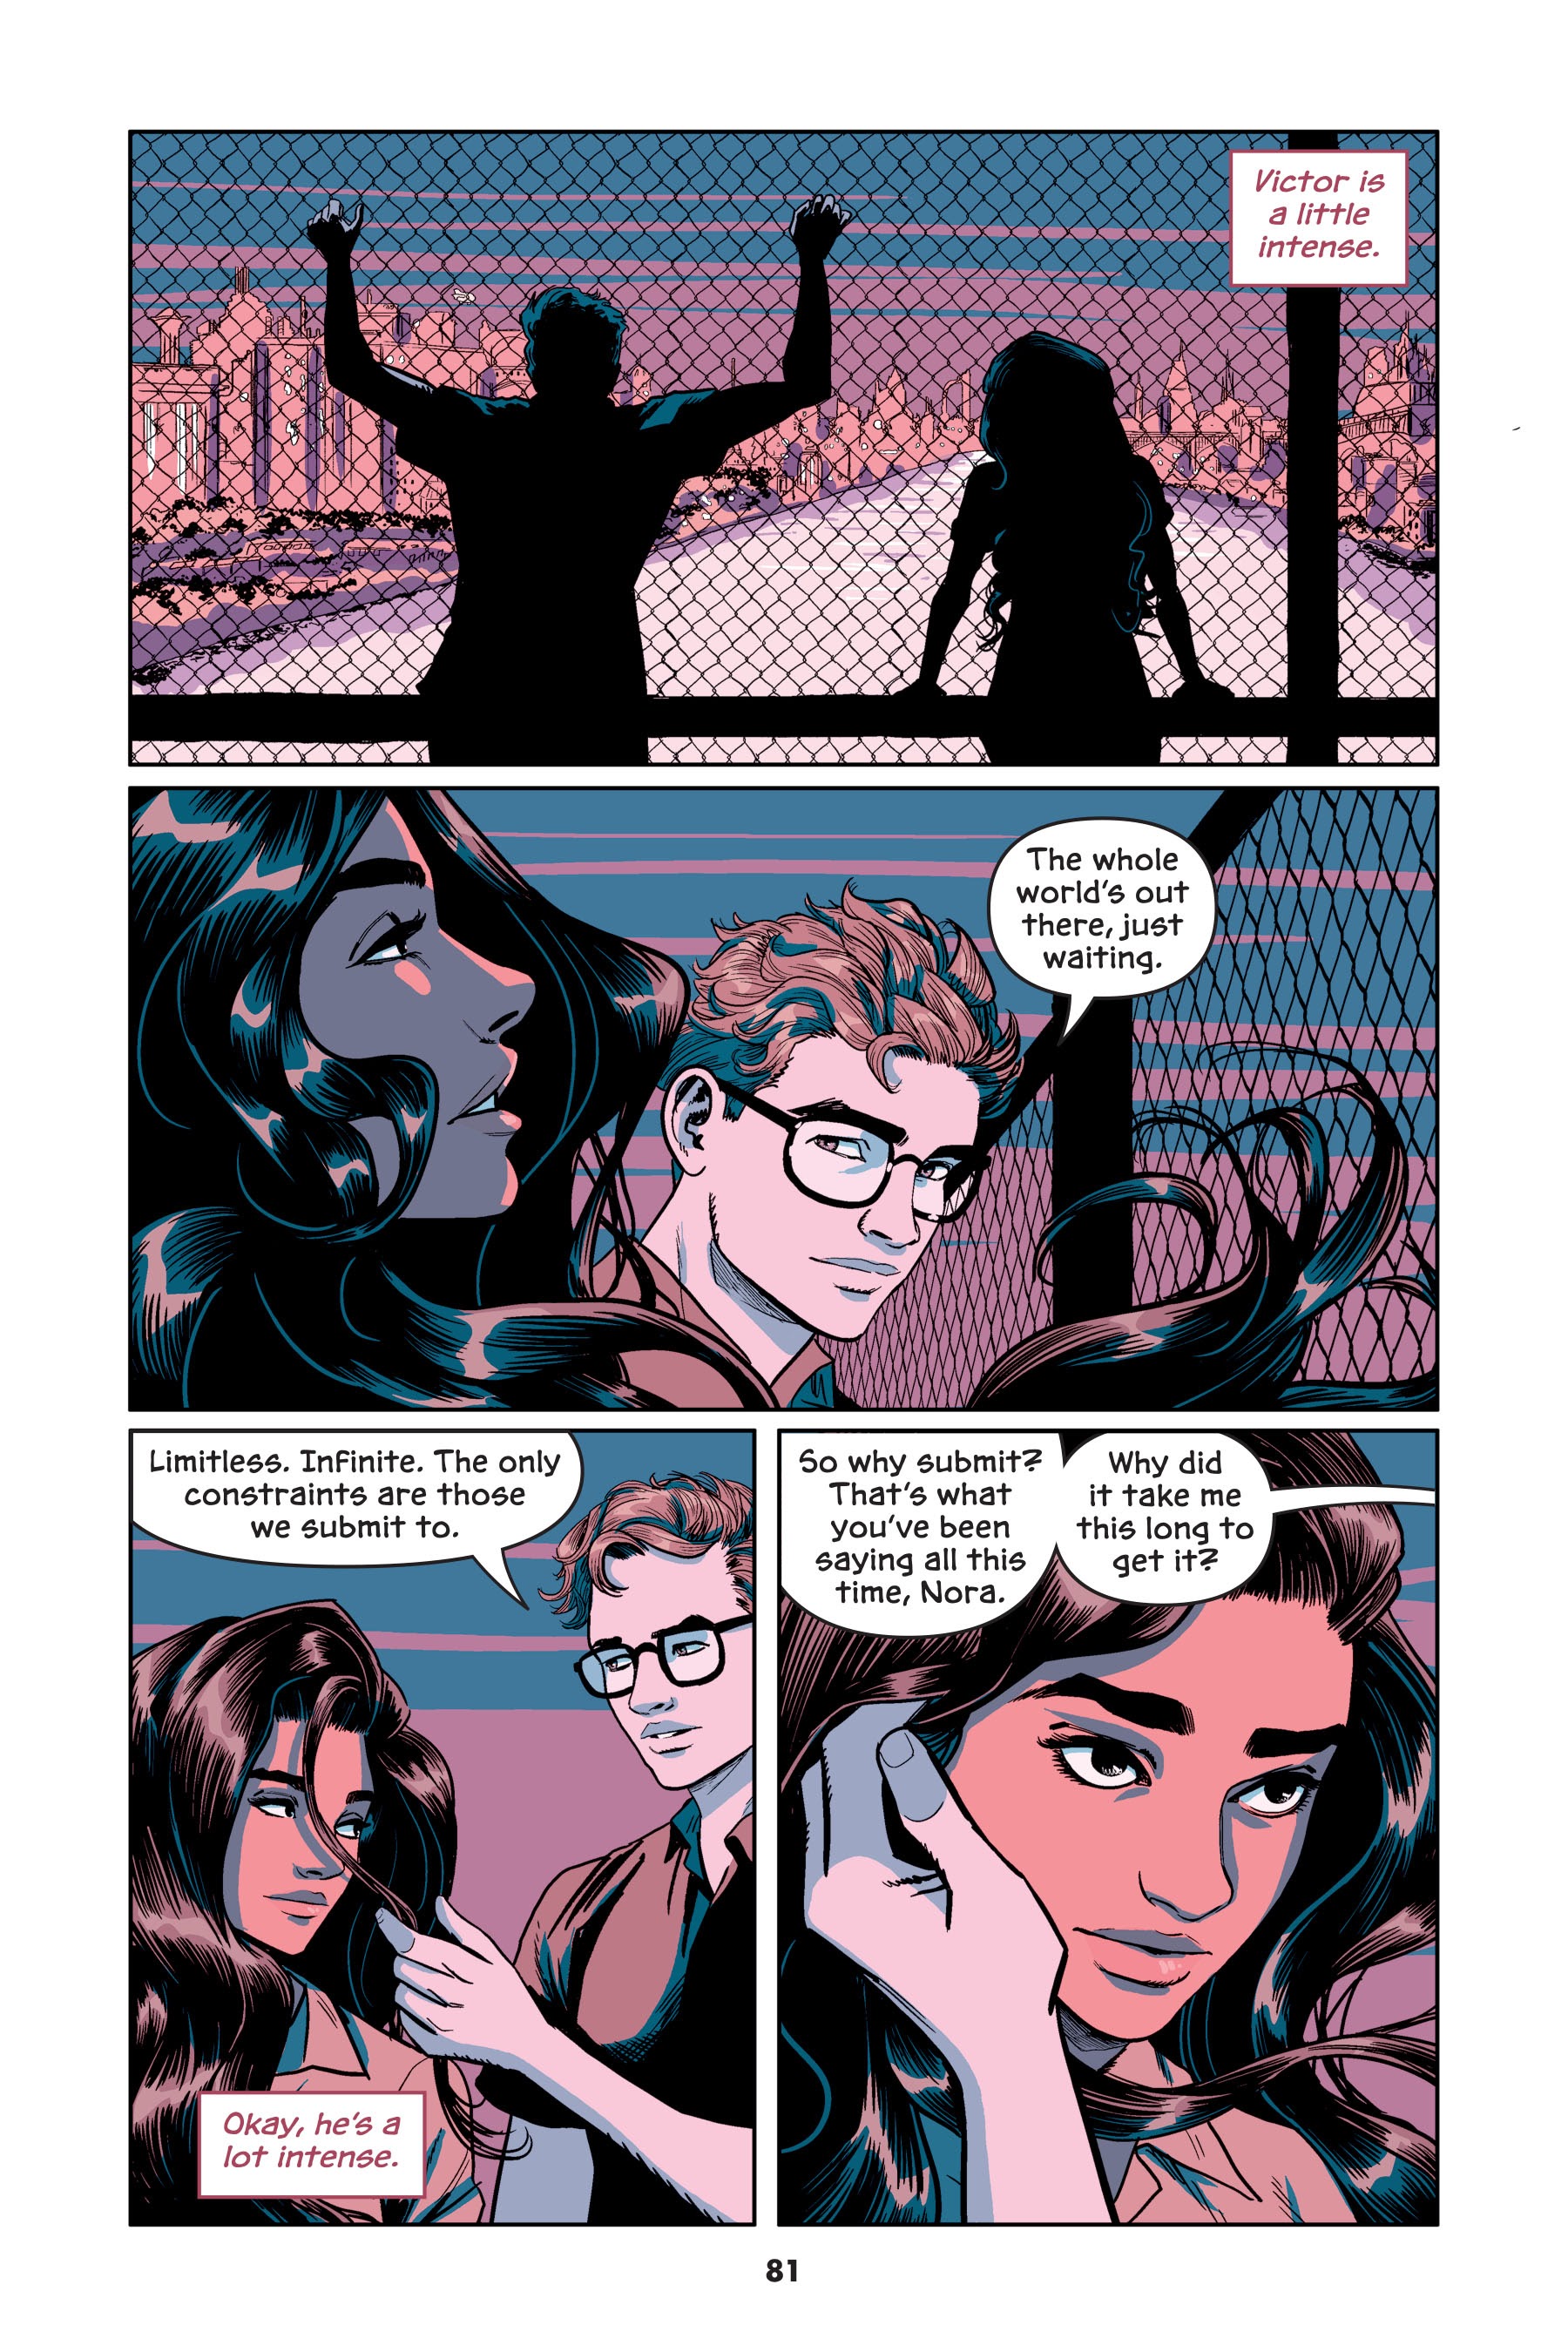 Read online Victor and Nora: A Gotham Love Story comic -  Issue # TPB (Part 1) - 80